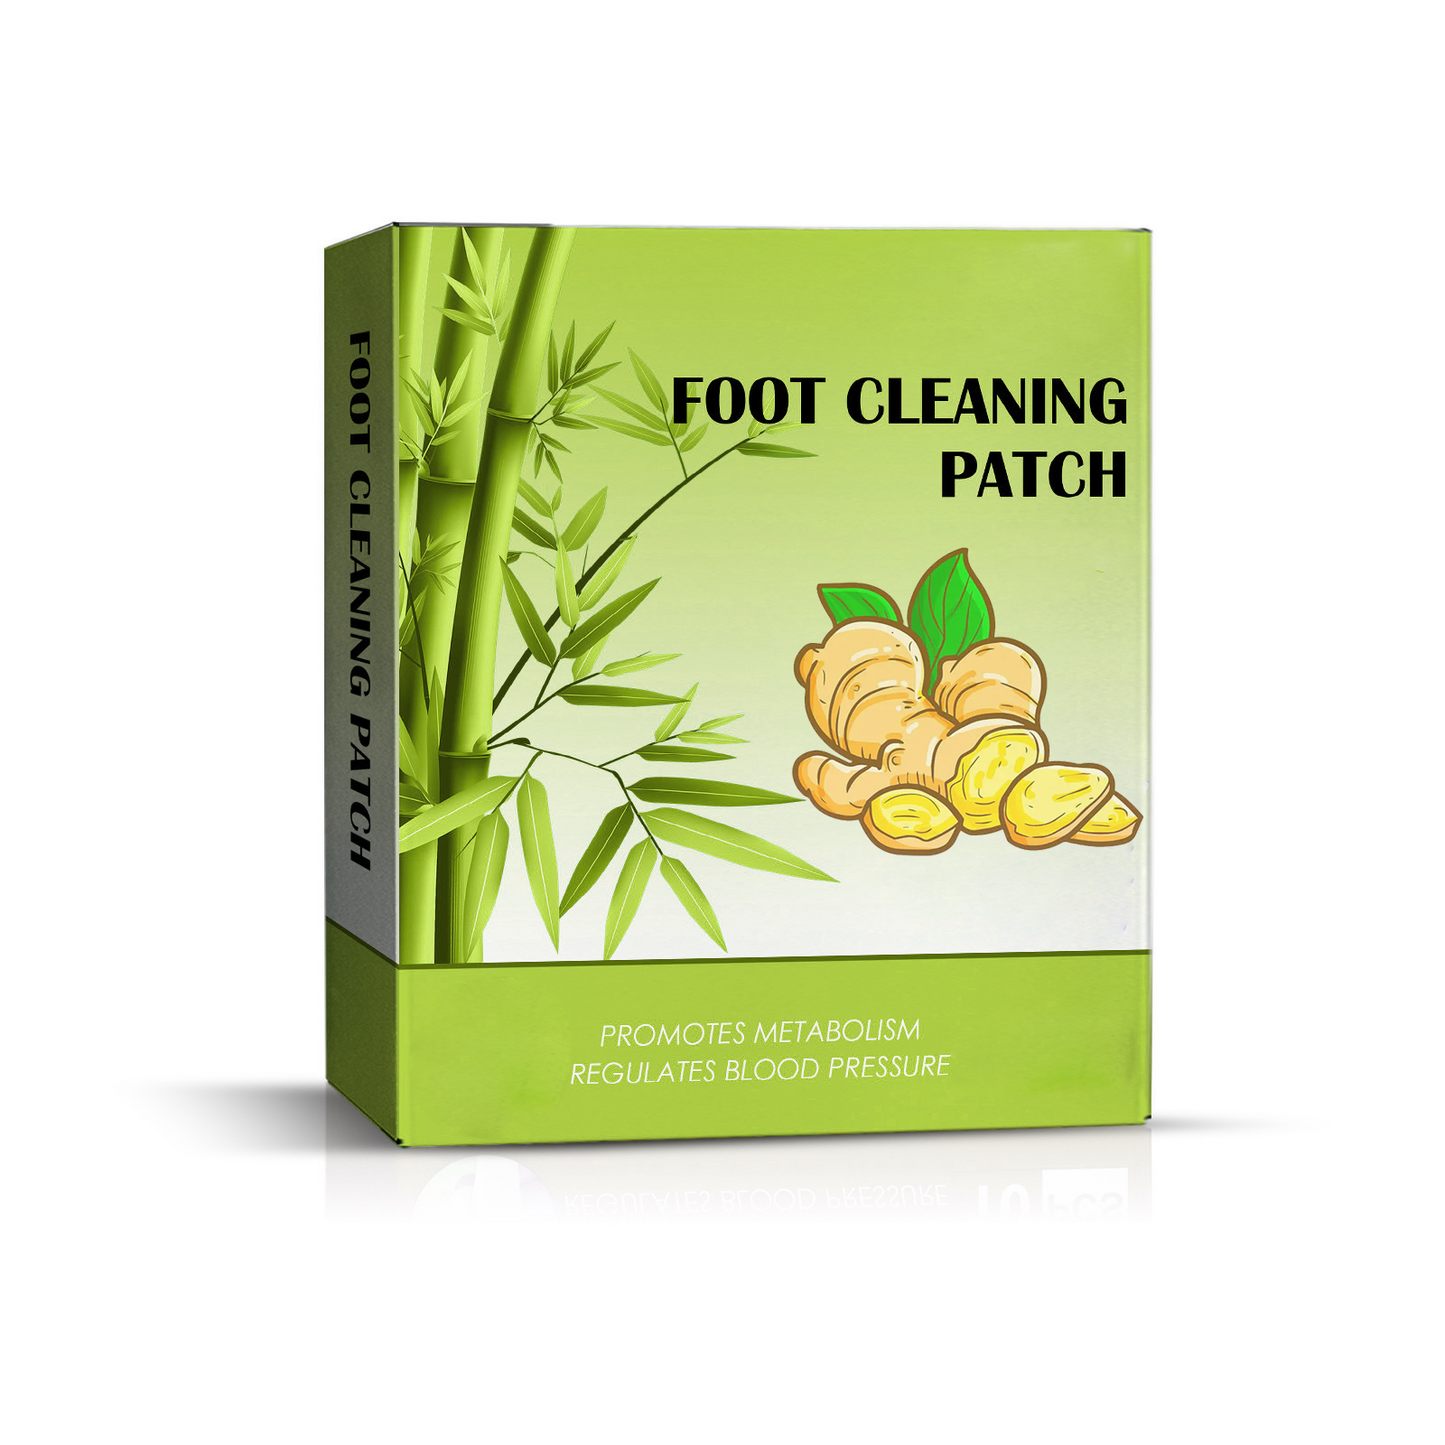 Deep Cleansing Foot Care Patches Bamboo Vinegar, Ginger, Aromatic Herbs - Natural & Easy-to-Use - Helps Support Sleep & Skin Health - Soothe Stress & Pain Relief